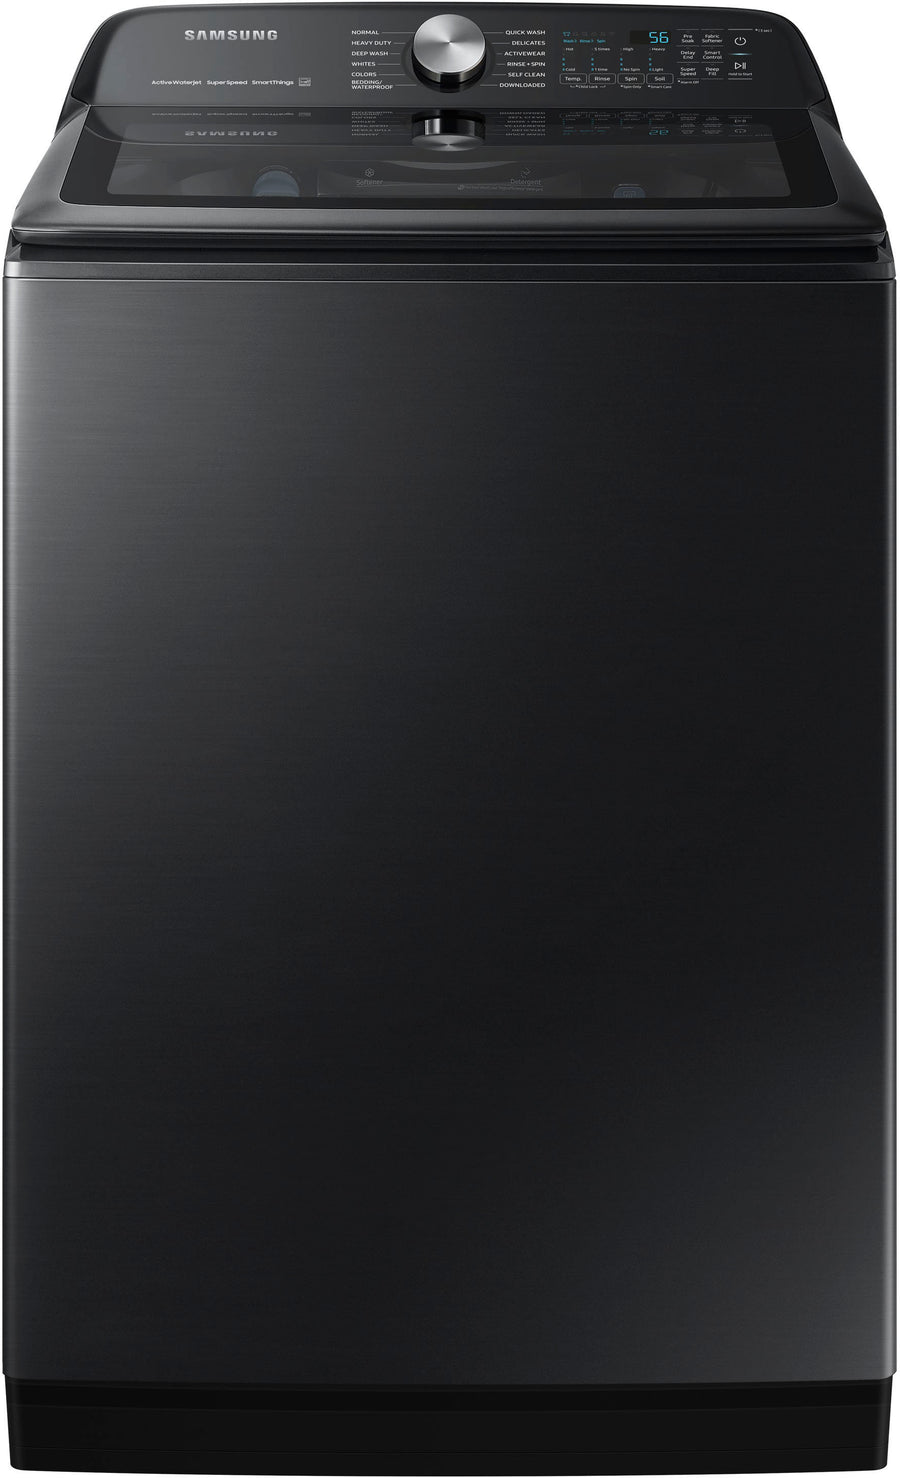 Samsung - 5.2 cu. ft. Large Capacity Smart Top Load Washer with Super Speed Wash - Brushed Black_0